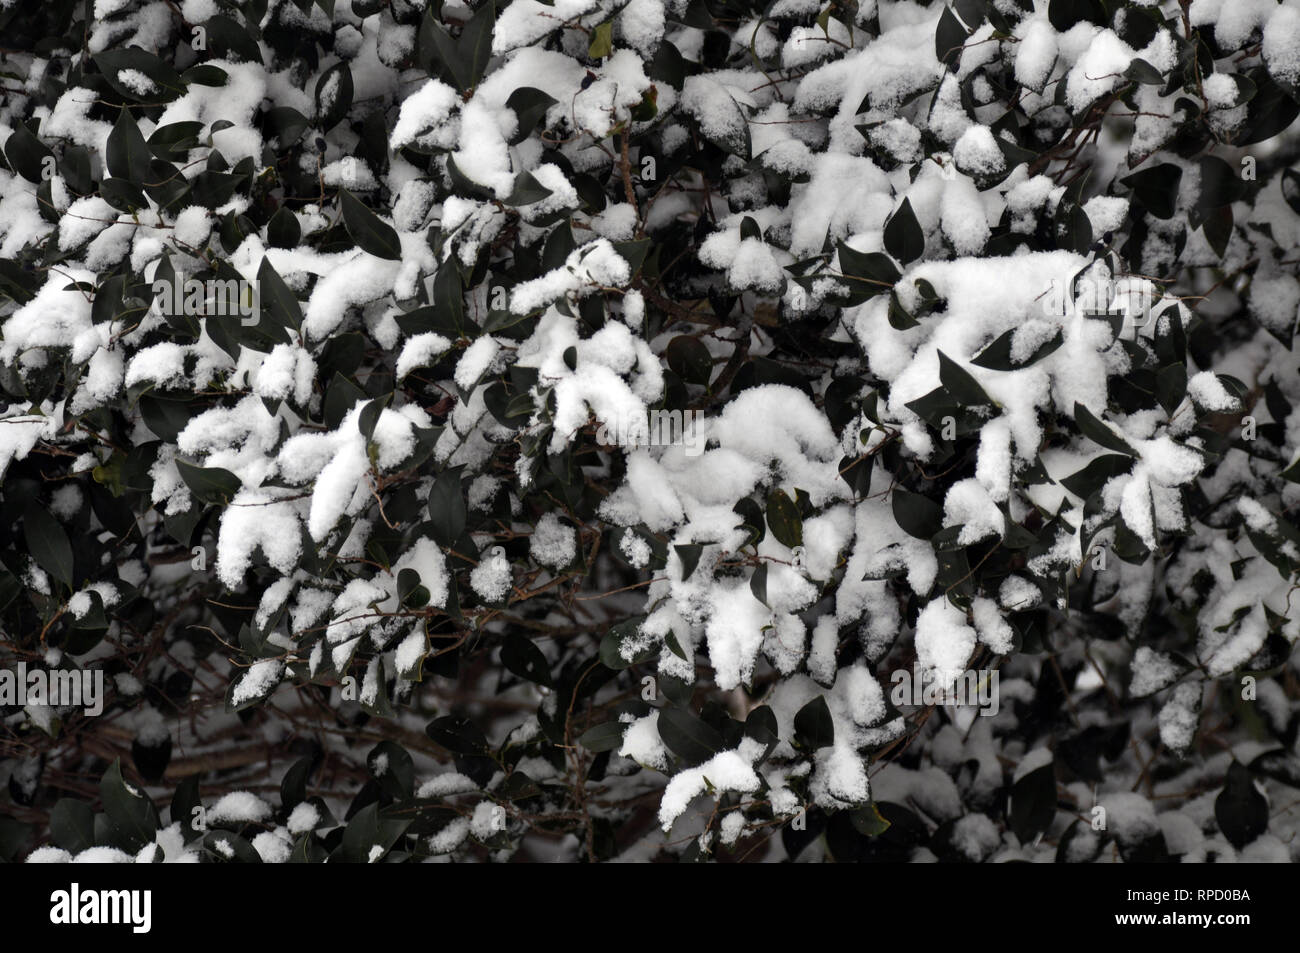 A Full Frame of a Snow Covered Hedge Stock Photo